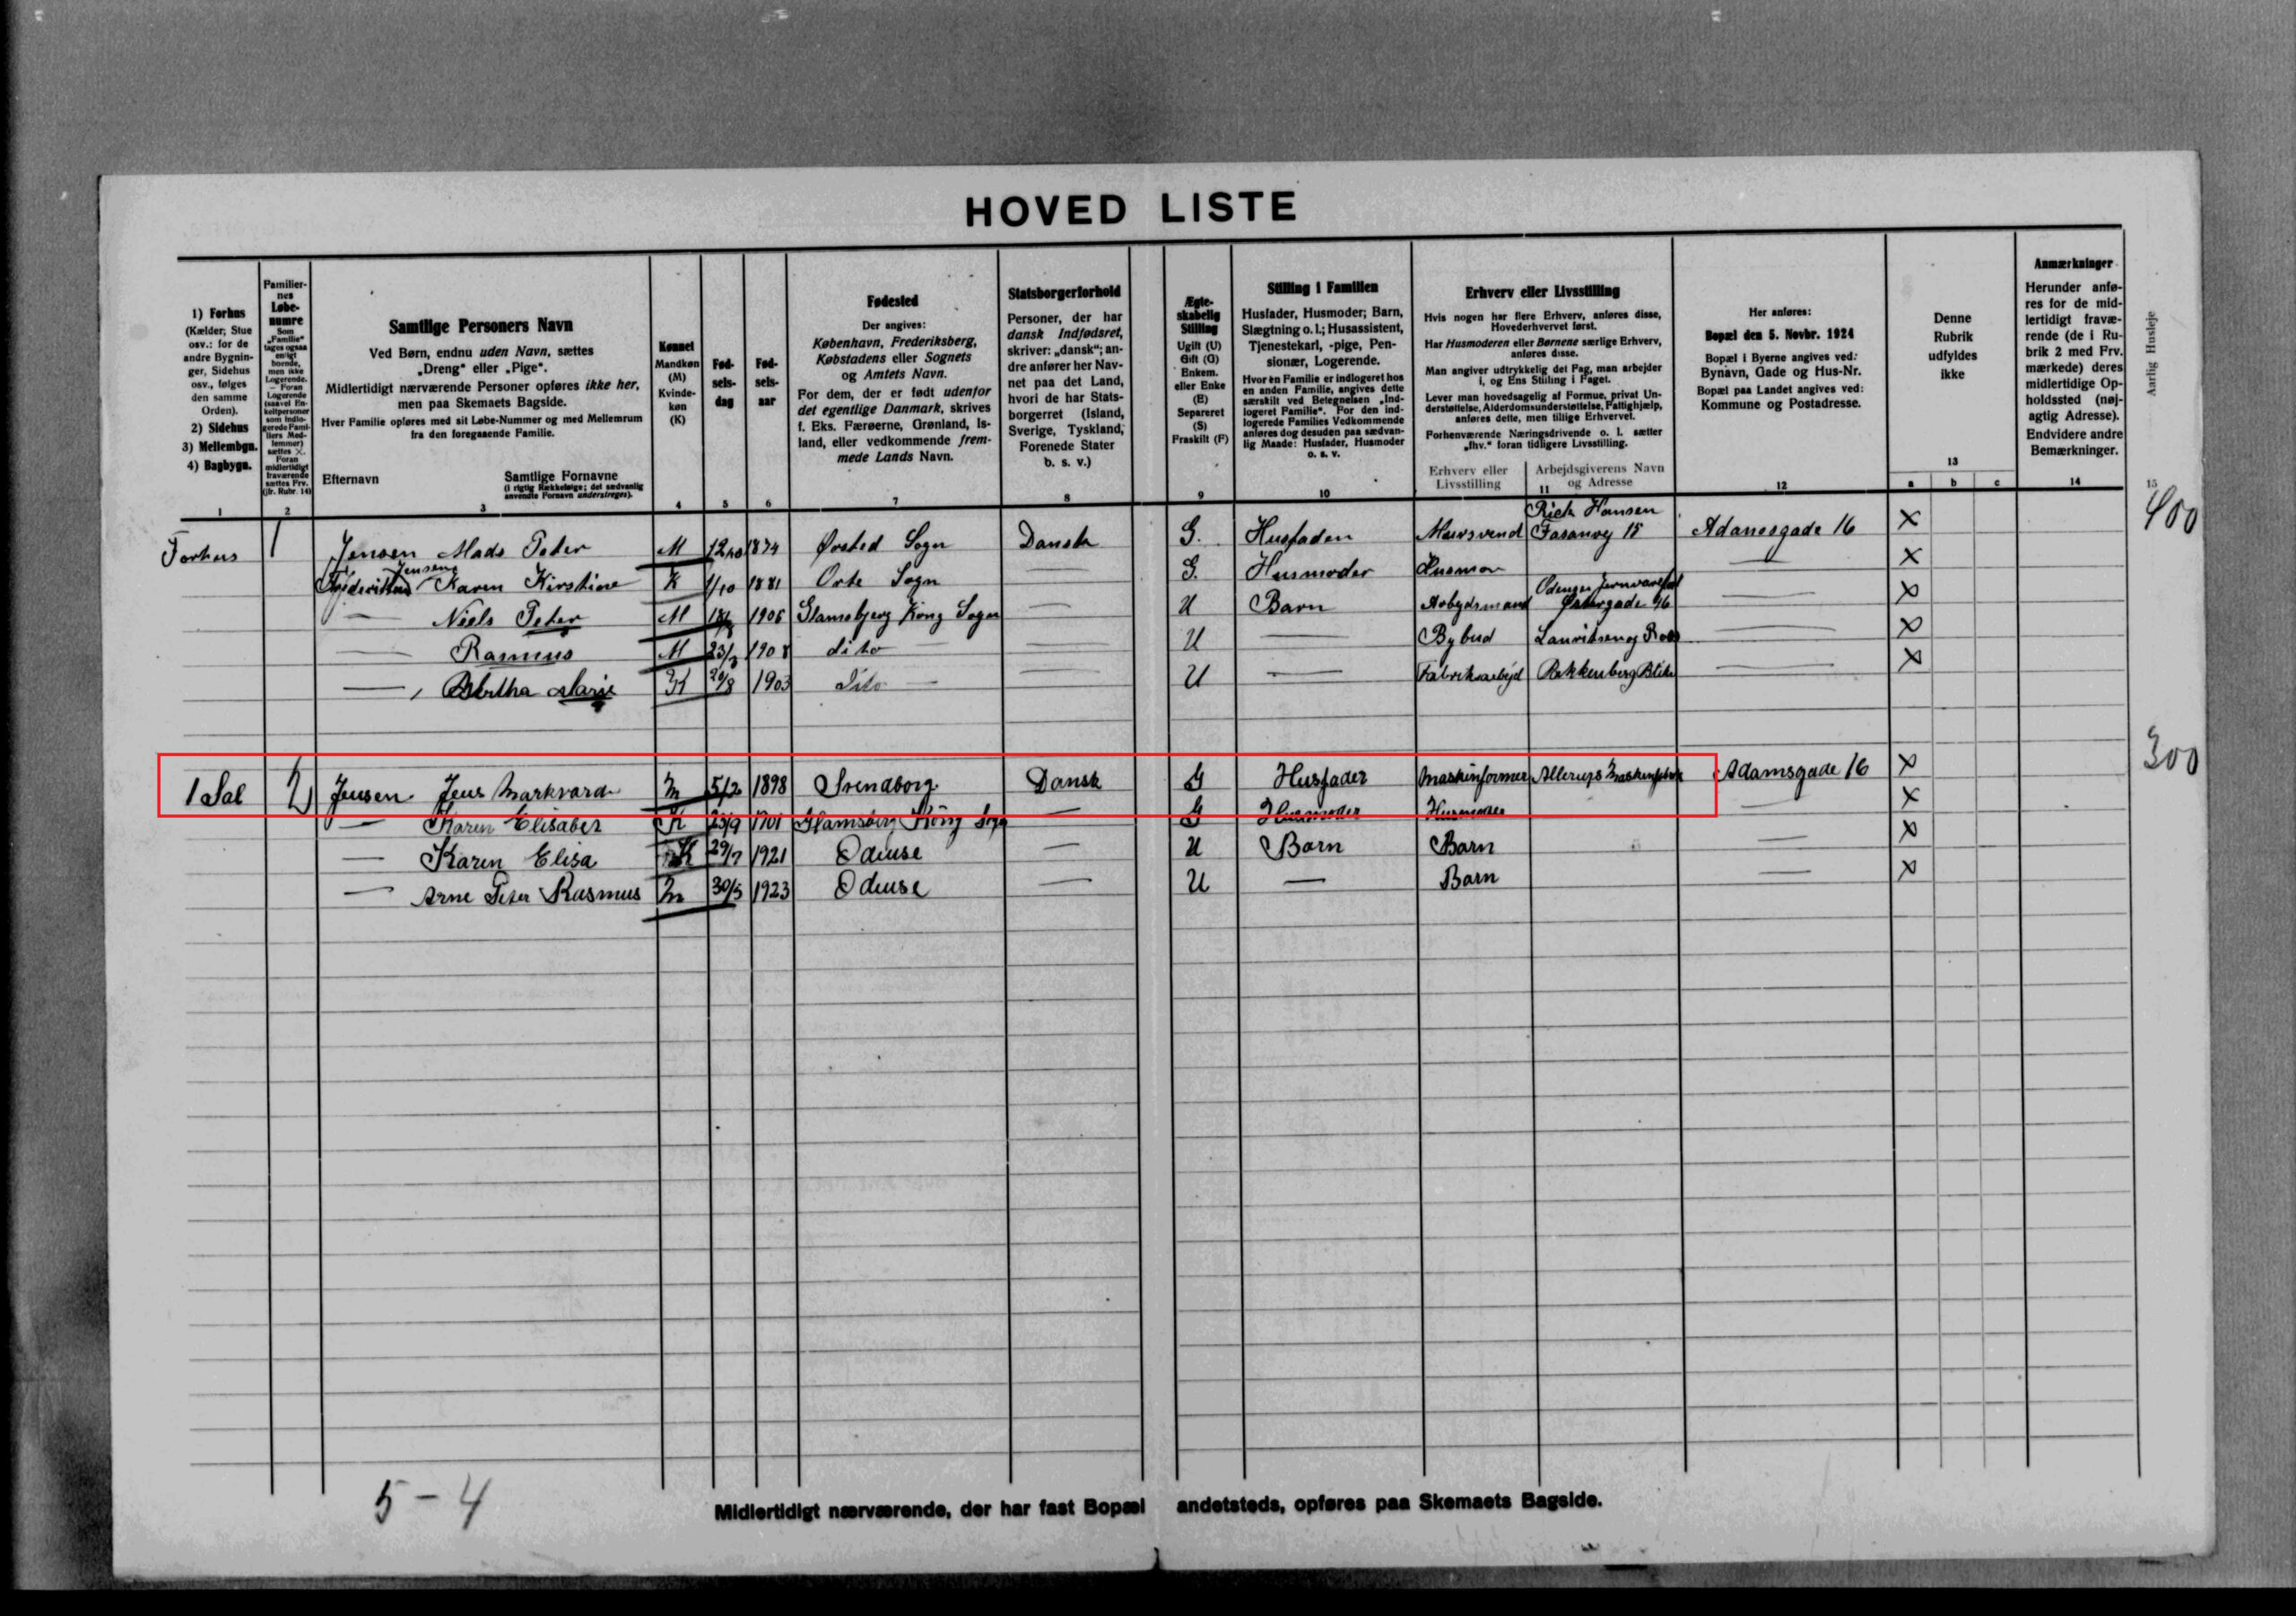 Jens Markvard Jensen, living at Adamsgade 16 in Odense with his wife and 2 children, in 1925. Credit: 1925 Denmark Census on MyHeritage